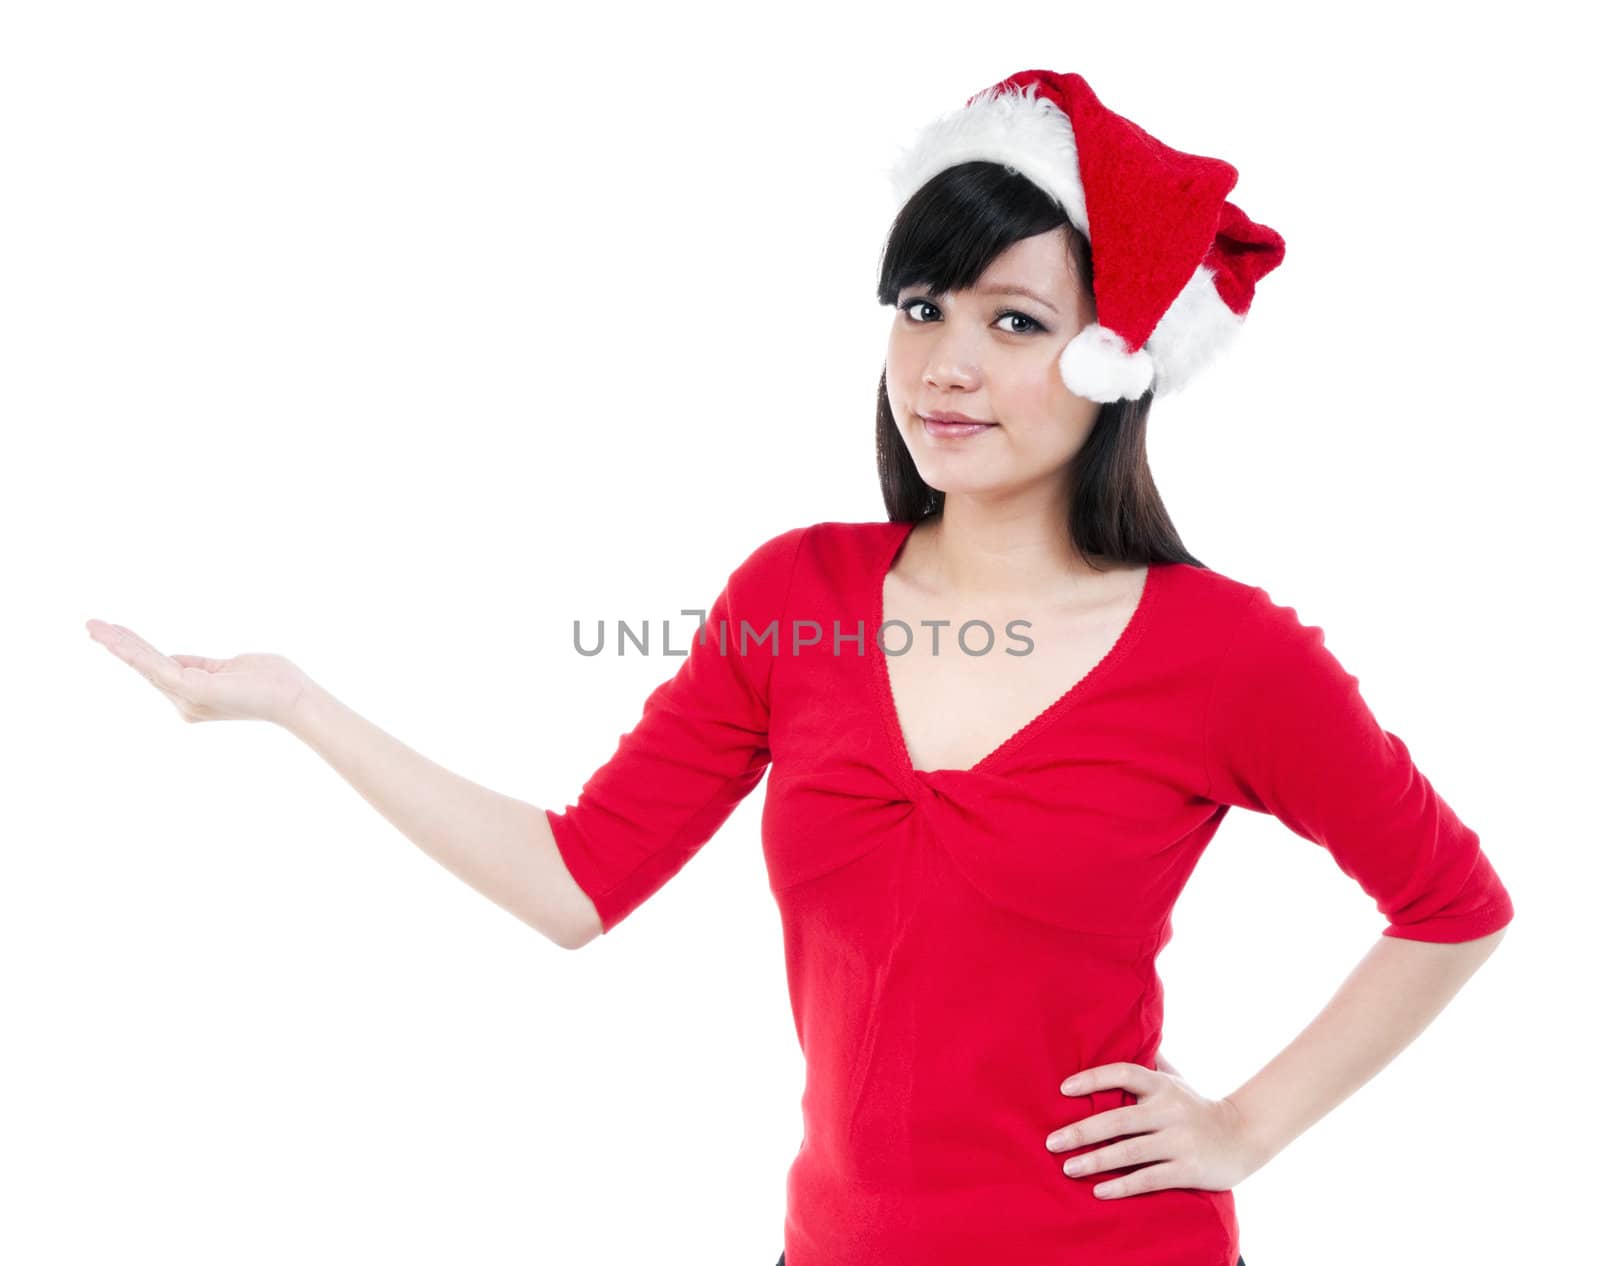 Portrait of a cute Christmas woman with her hand outstretched against white background